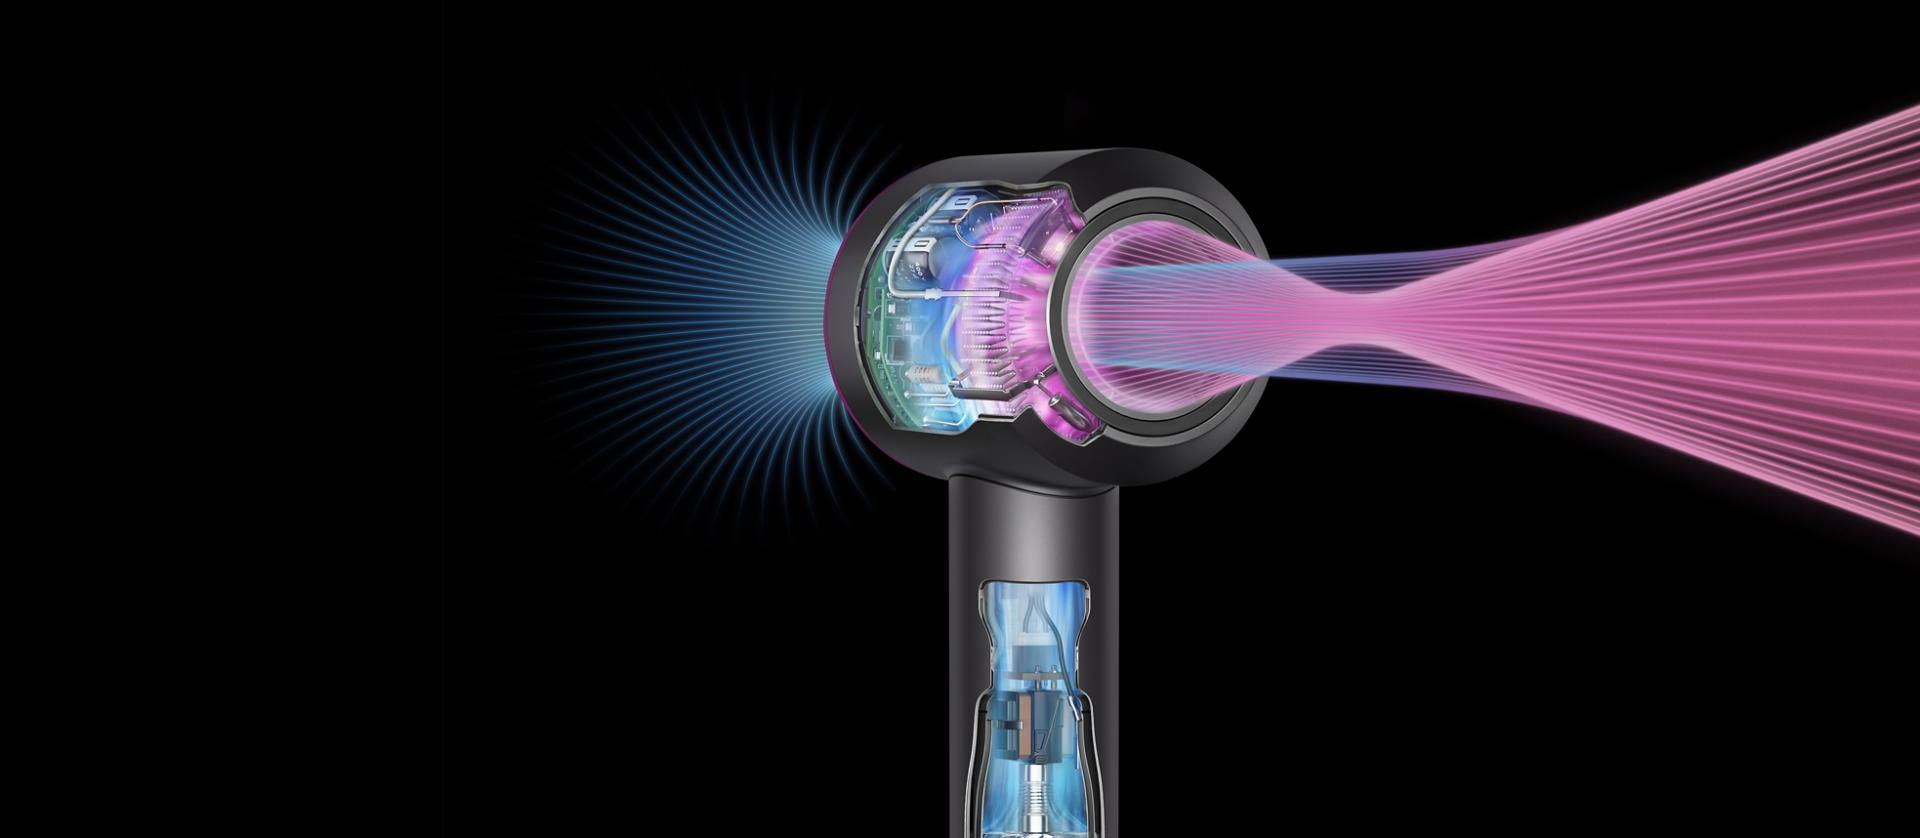 Illustration of the inner working of the Dyson supersonic